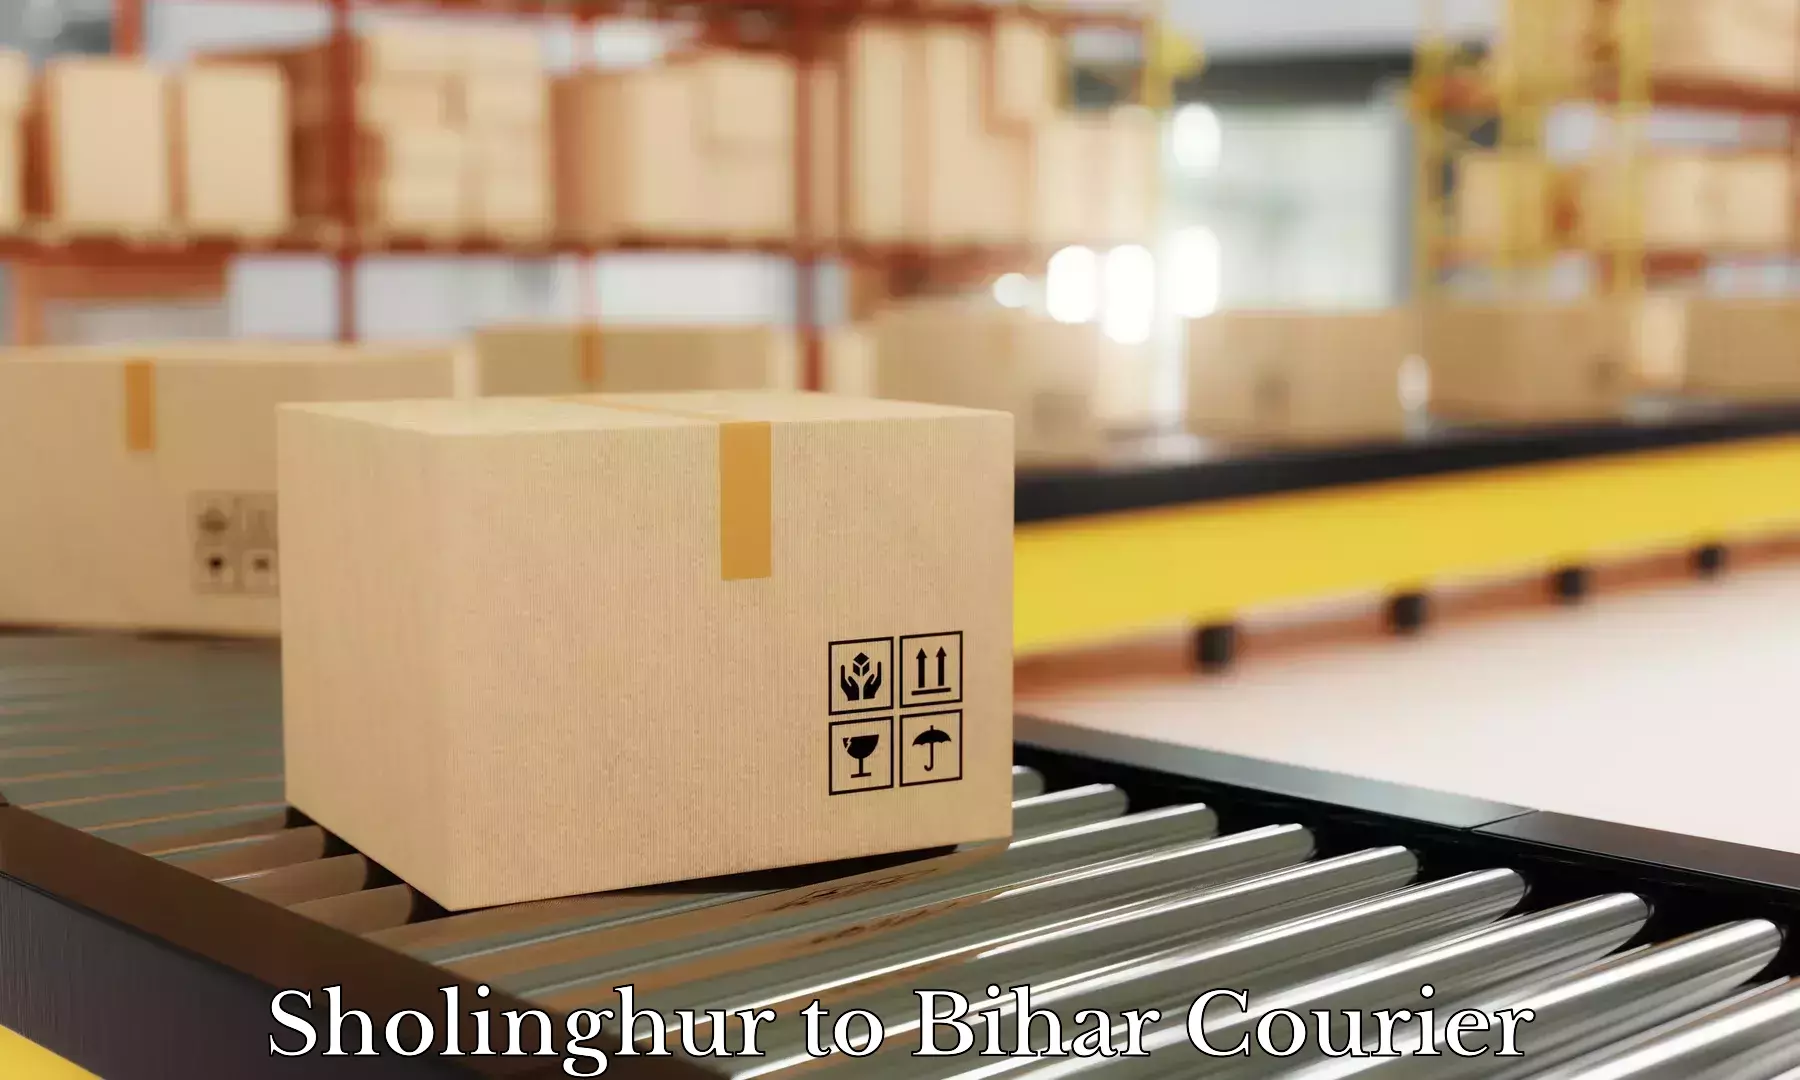 Luggage shipping specialists Sholinghur to Bihar